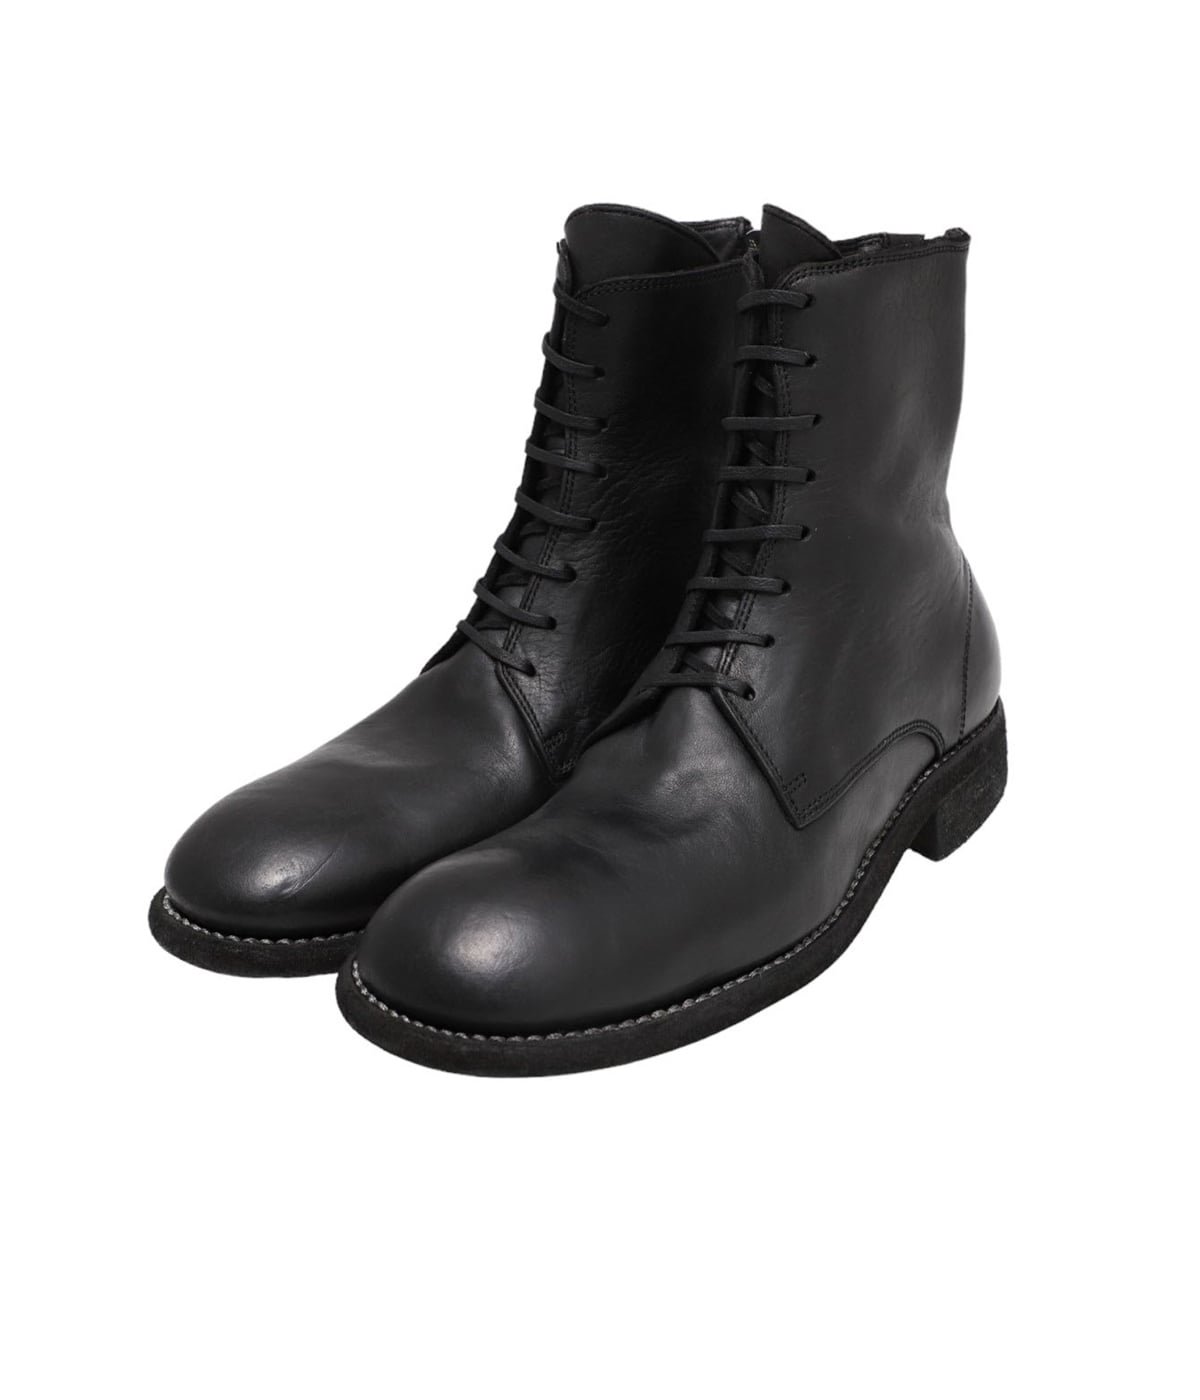 LACED UP AND BACK ZIP BOOTS | GUIDI(グイディ) / シューズ レザー 